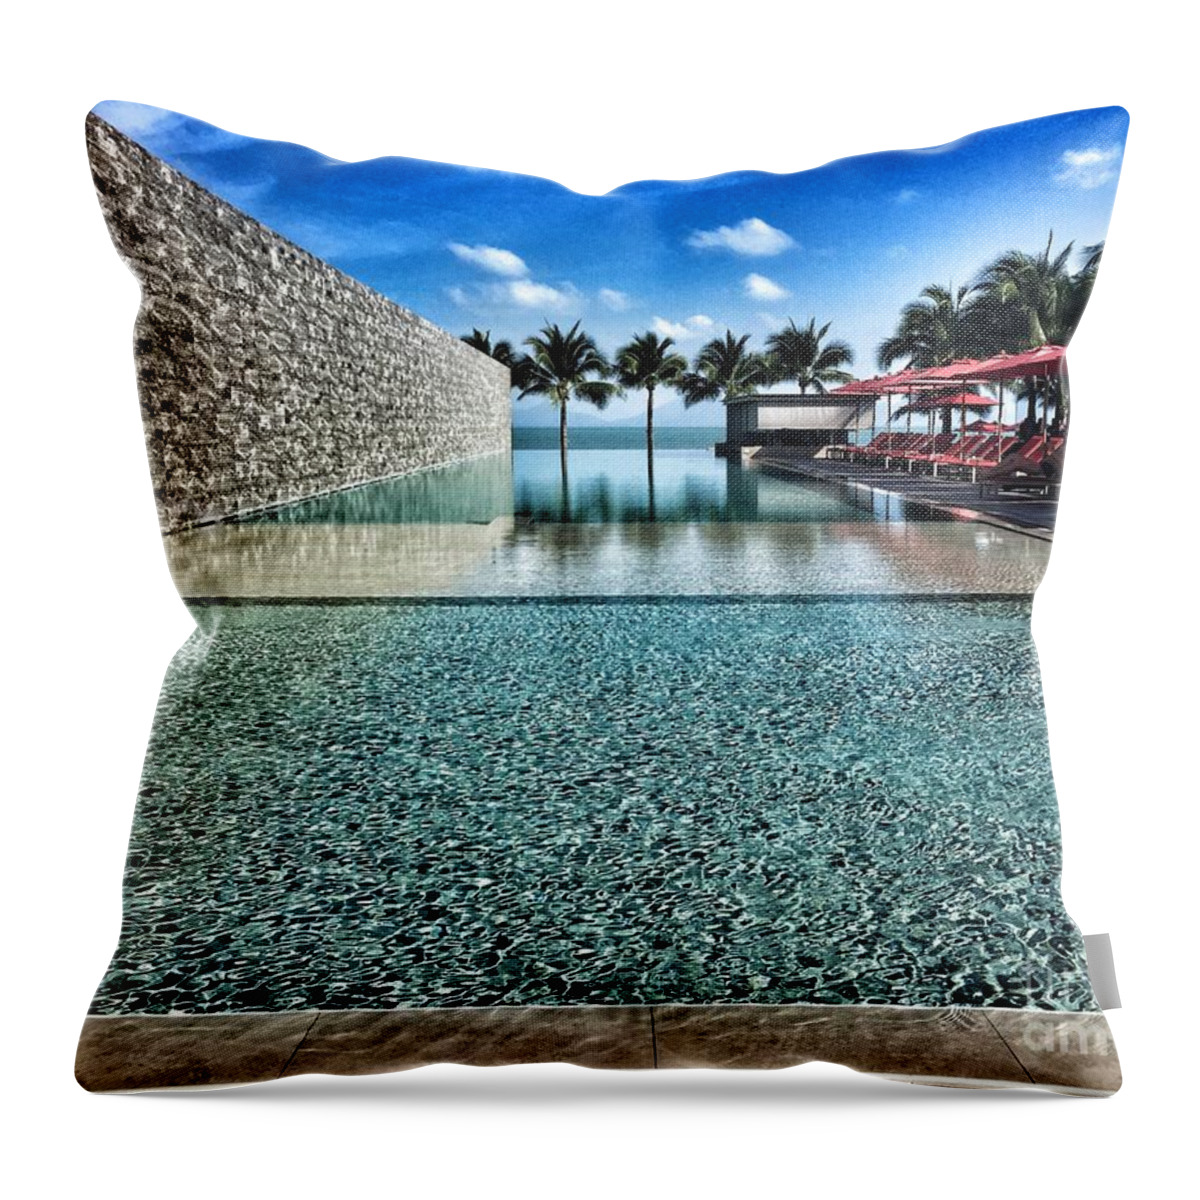 Vacation Throw Pillow featuring the photograph My Pool by Thomas Schroeder